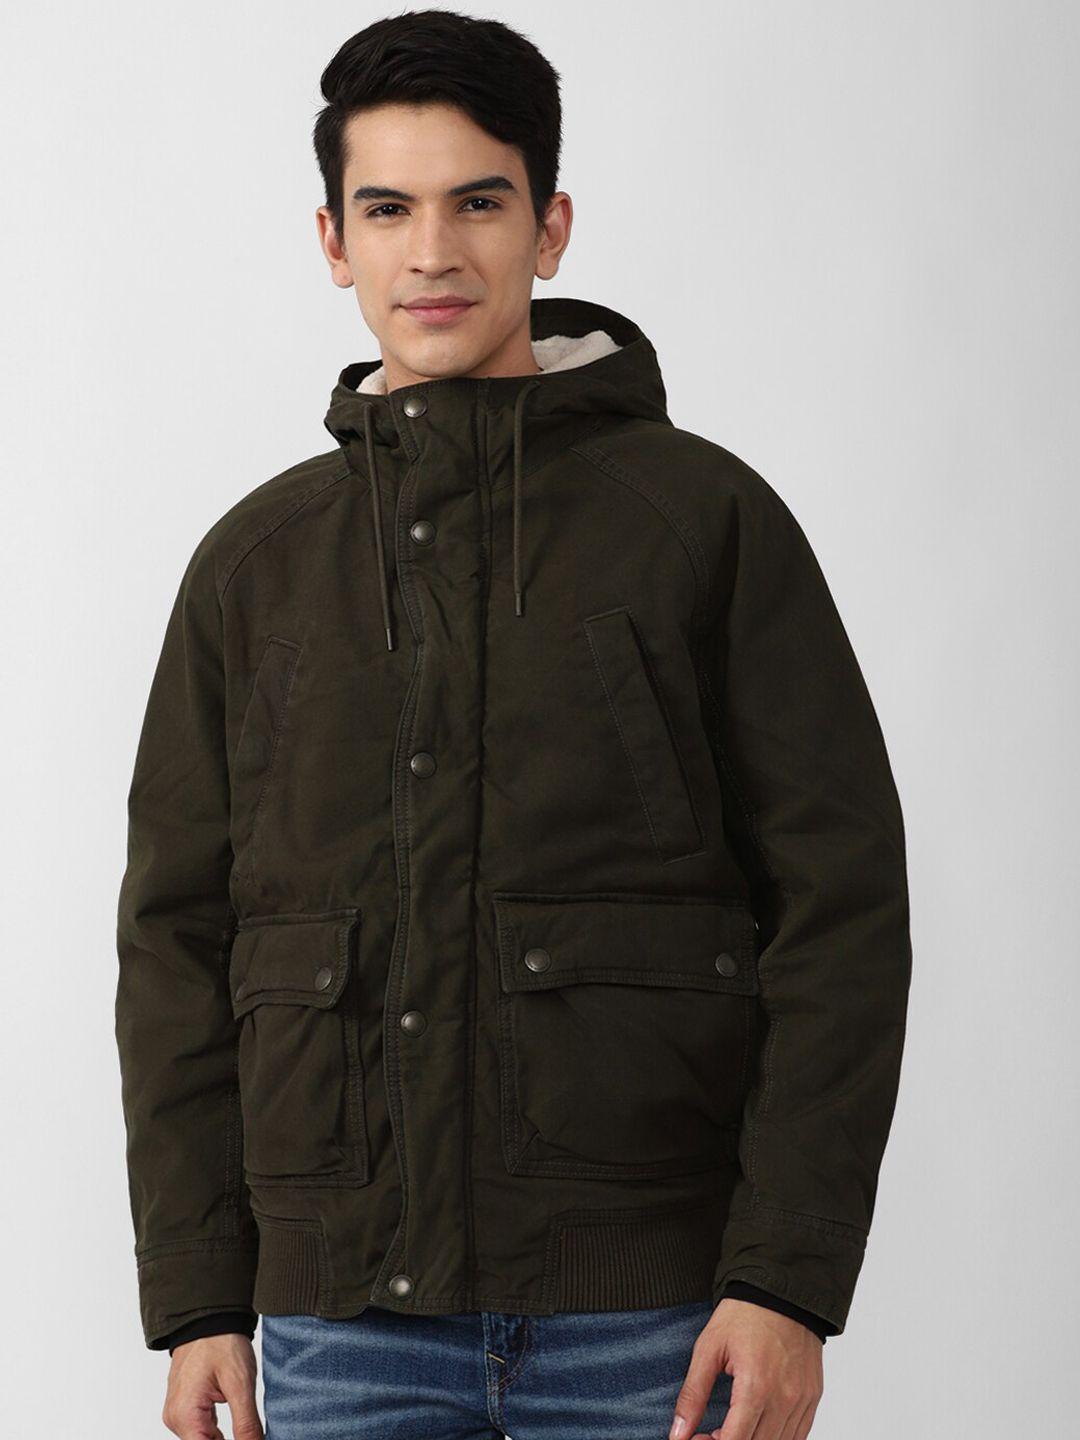 american-eagle-outfitters-men-olive-green-cotton-padded-jacket